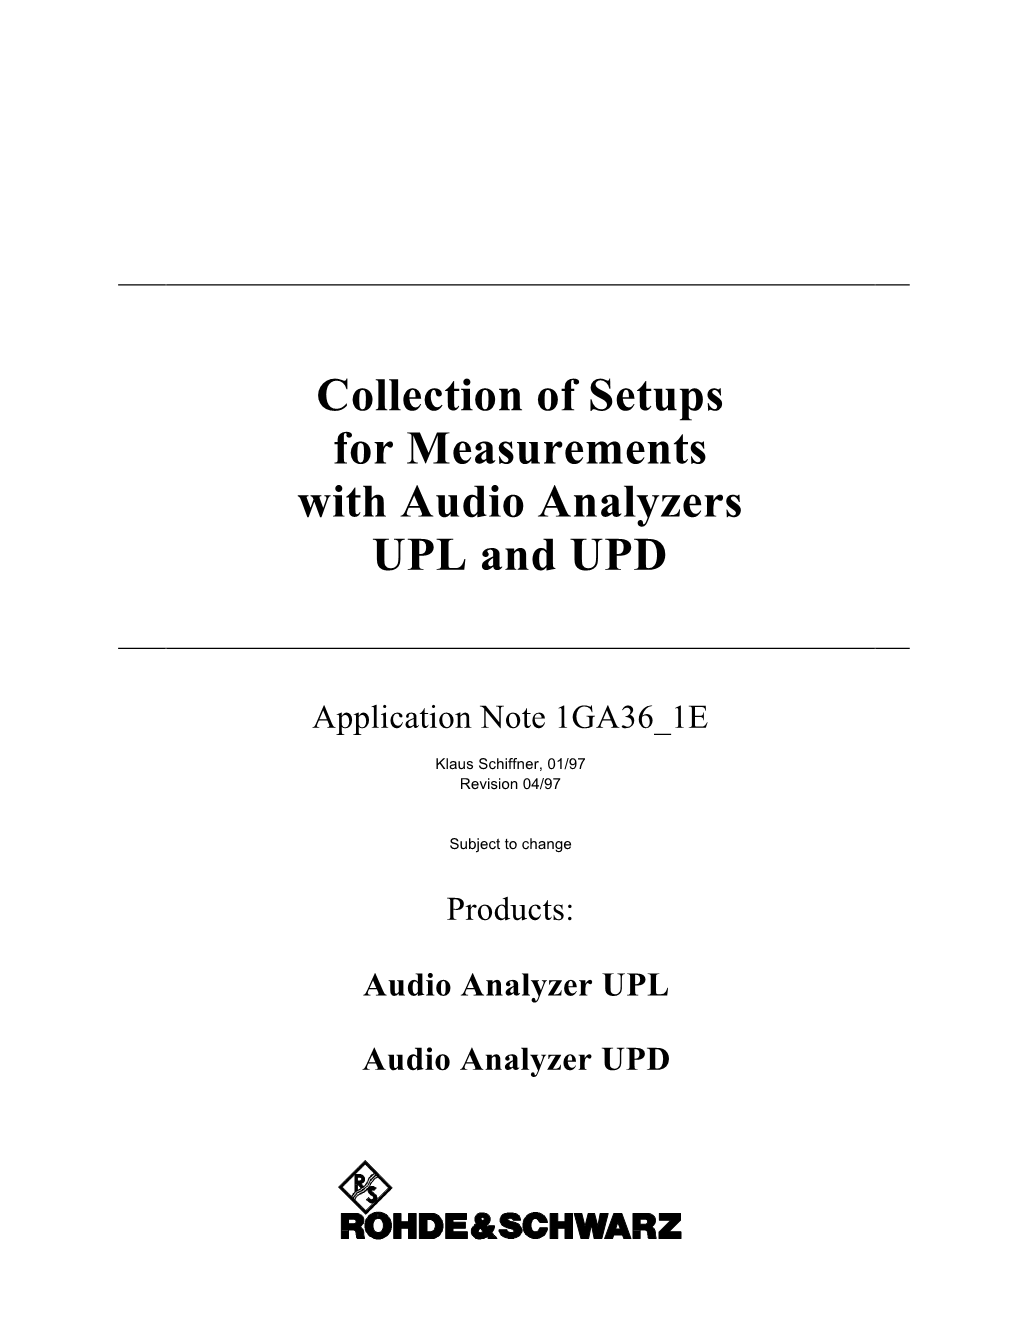 Collection of Setups for Measurements with Audio Analyzers UPL and UPD